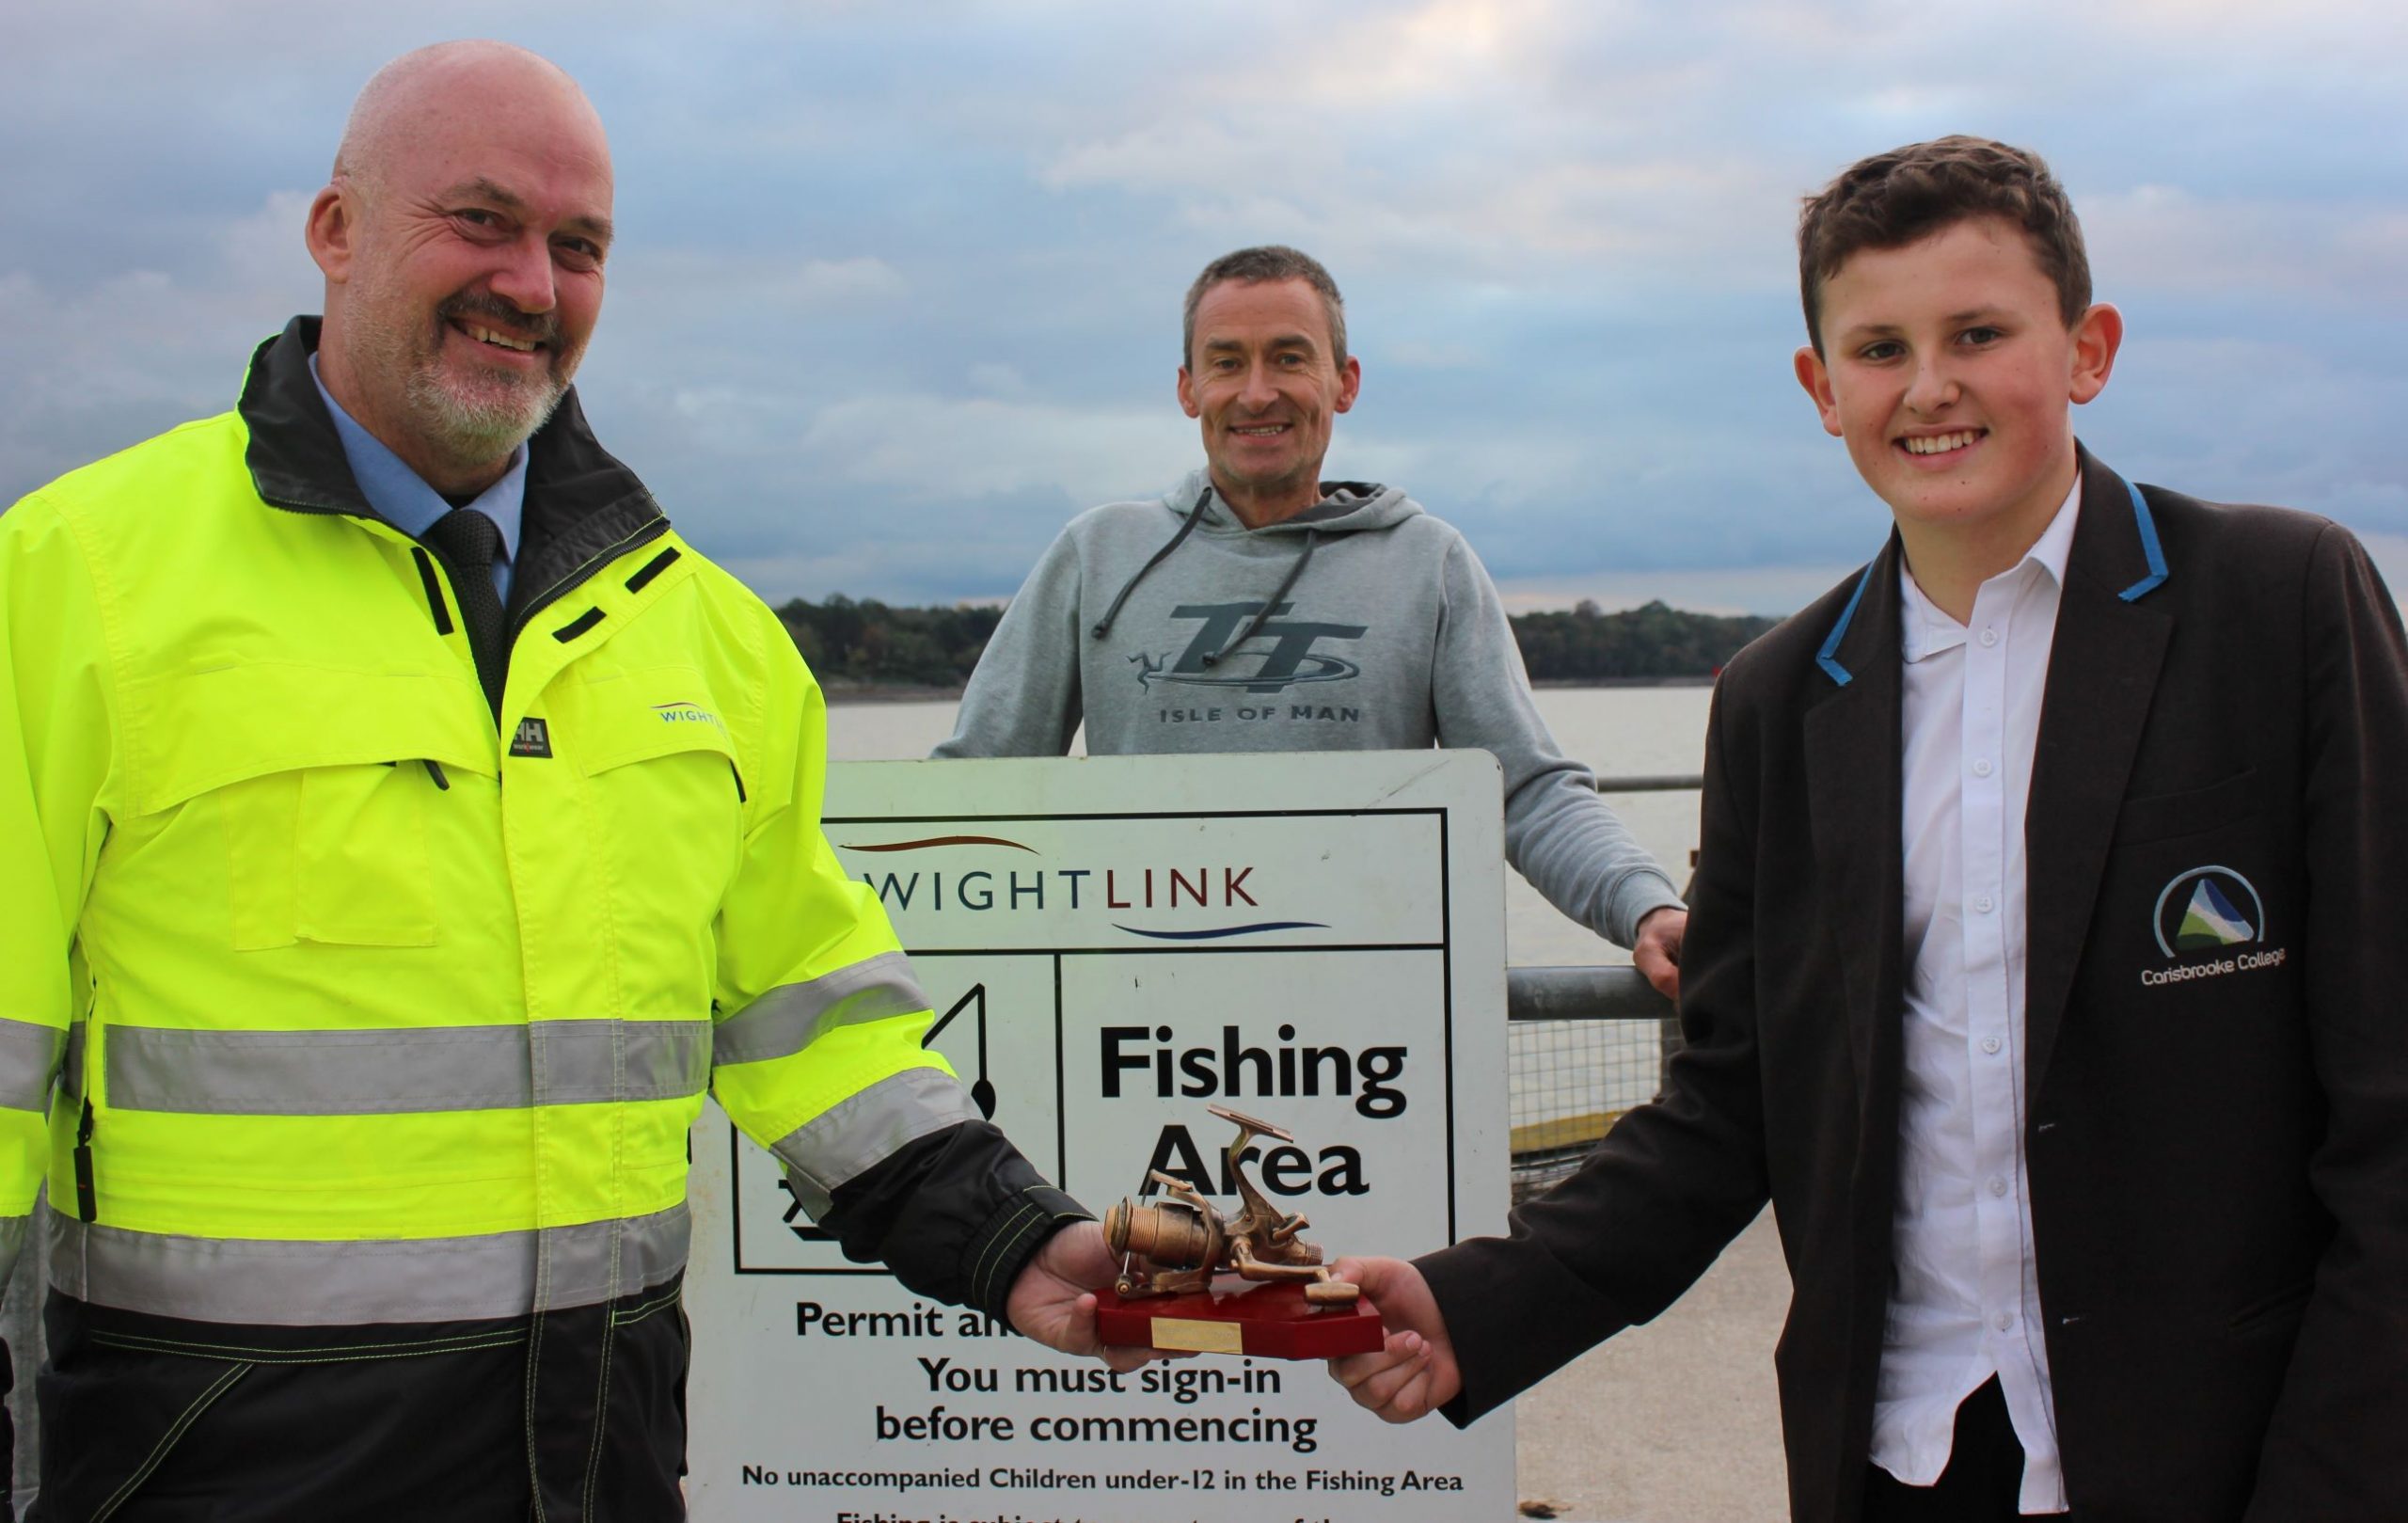 Twelve-year-old Tyler Thompson receiving an angling award from Wightlink